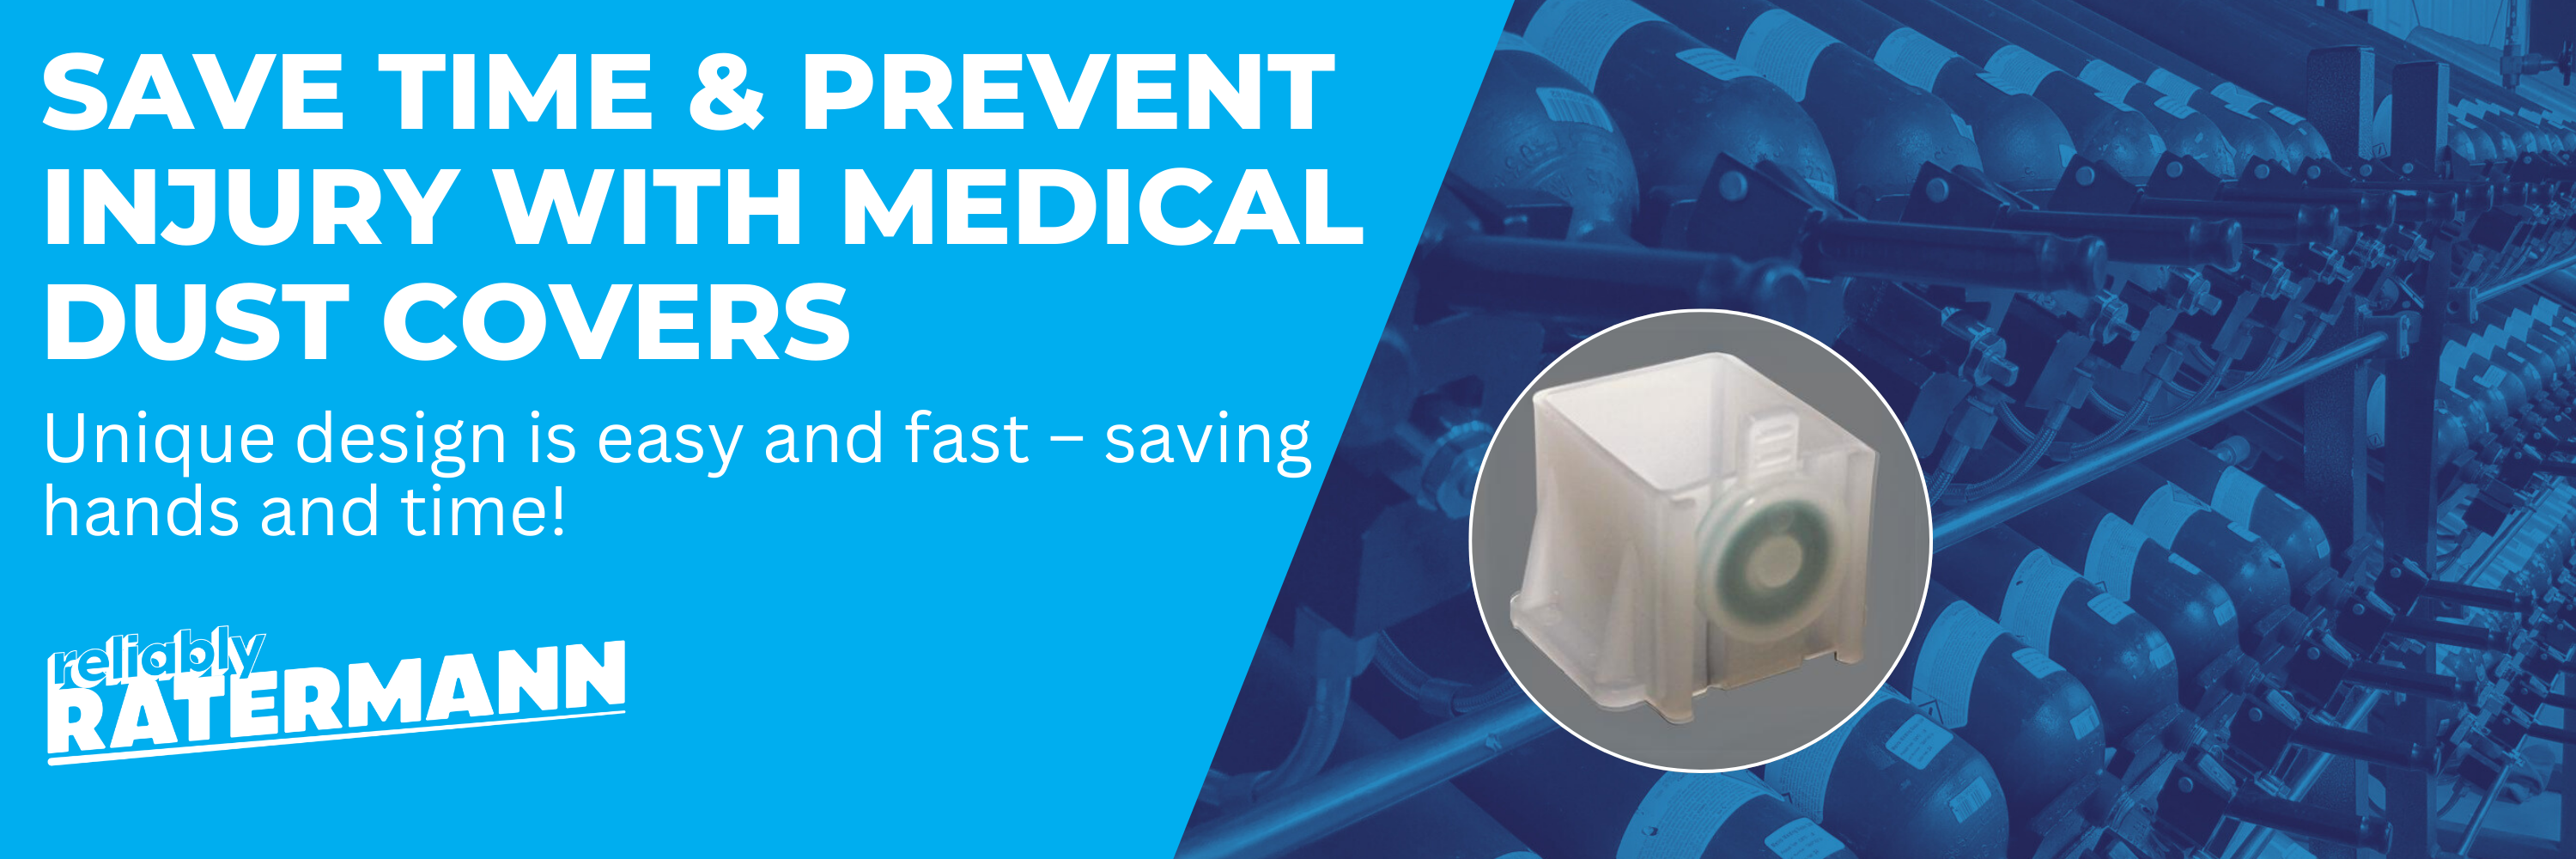 Save Time and Prevent Injury with Ratermann Medical Dust Covers